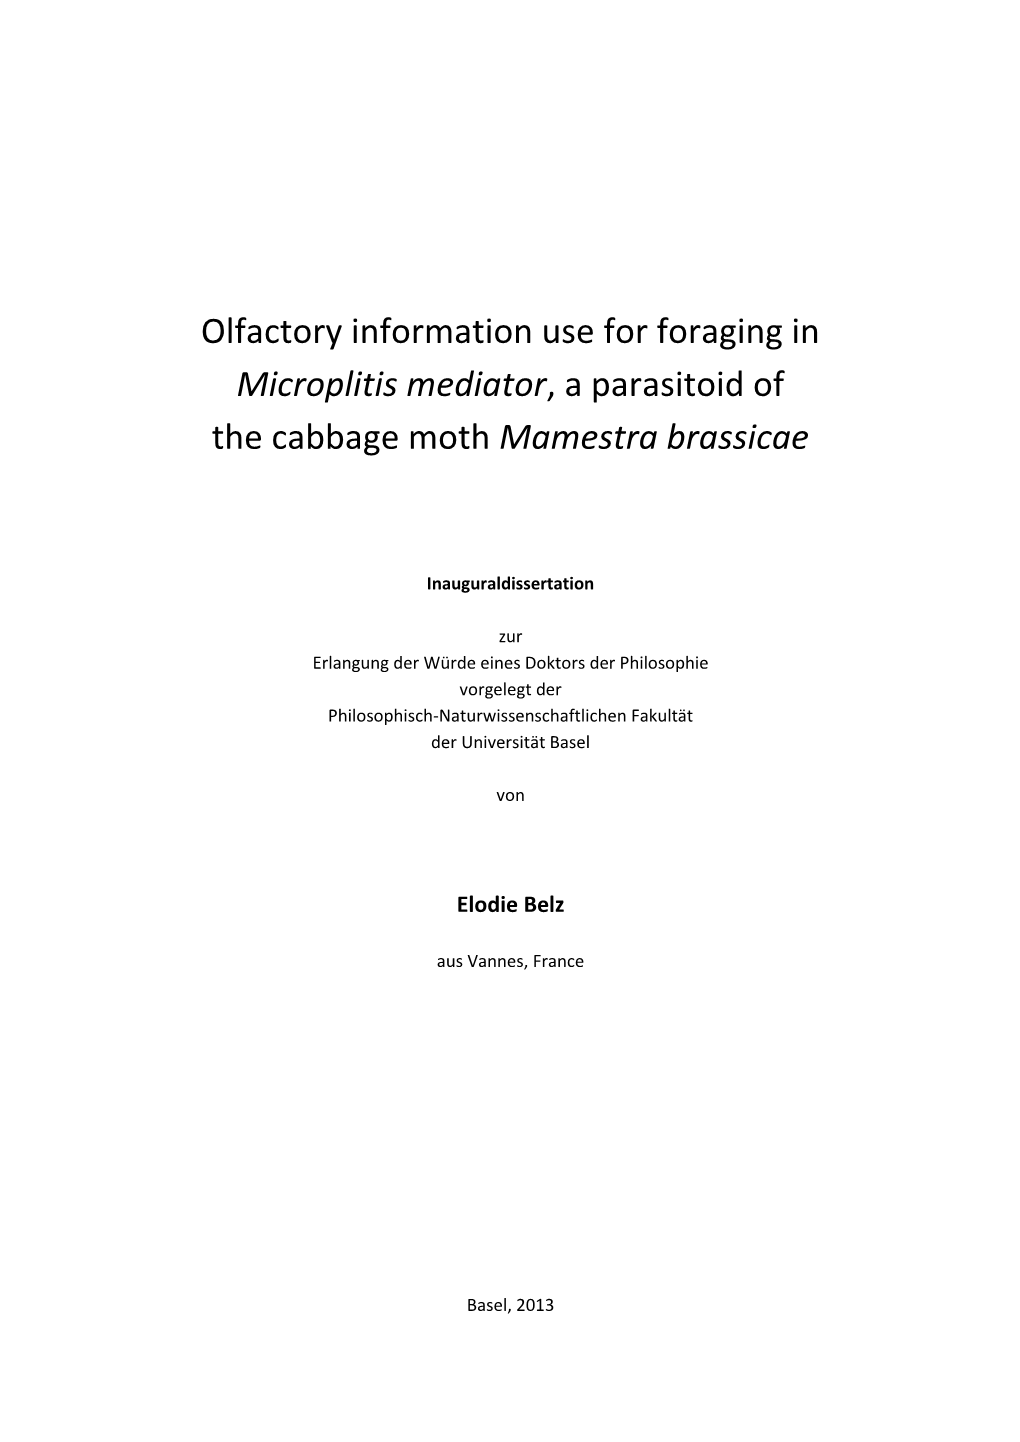 Olfactory Information Use for Foraging in Microplitis Mediator, a Parasitoid of the Cabbage Moth Mamestra Brassicae